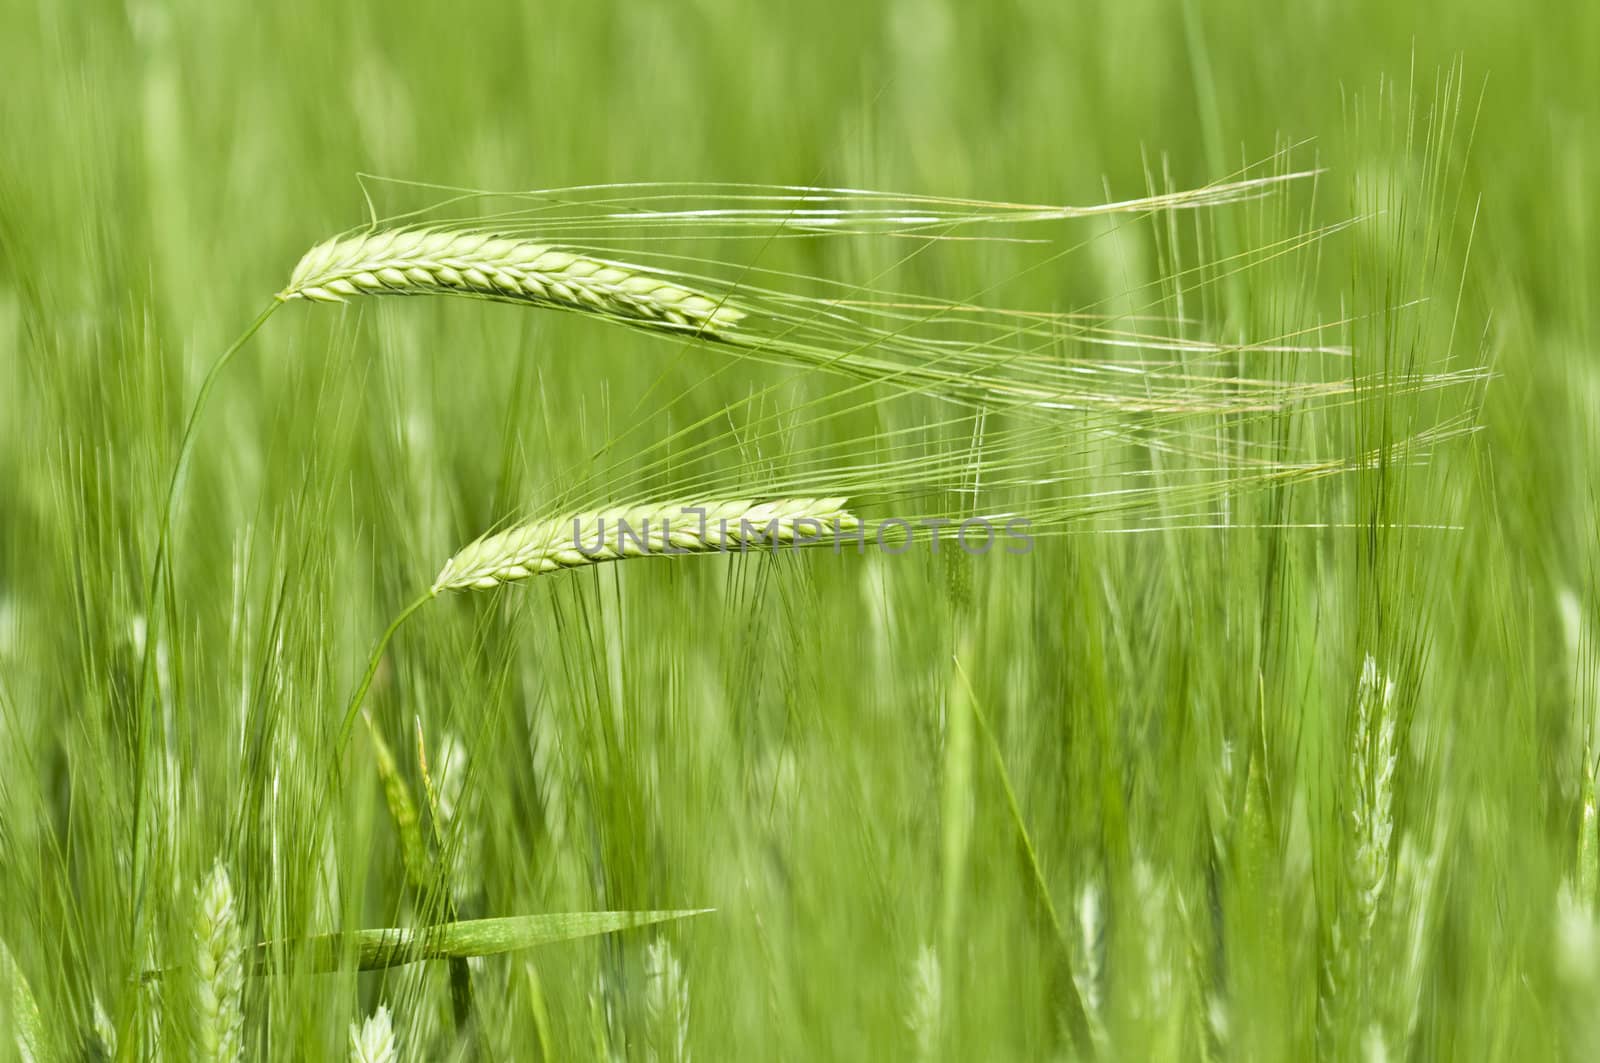 Two green wheat spikes bent by the wind